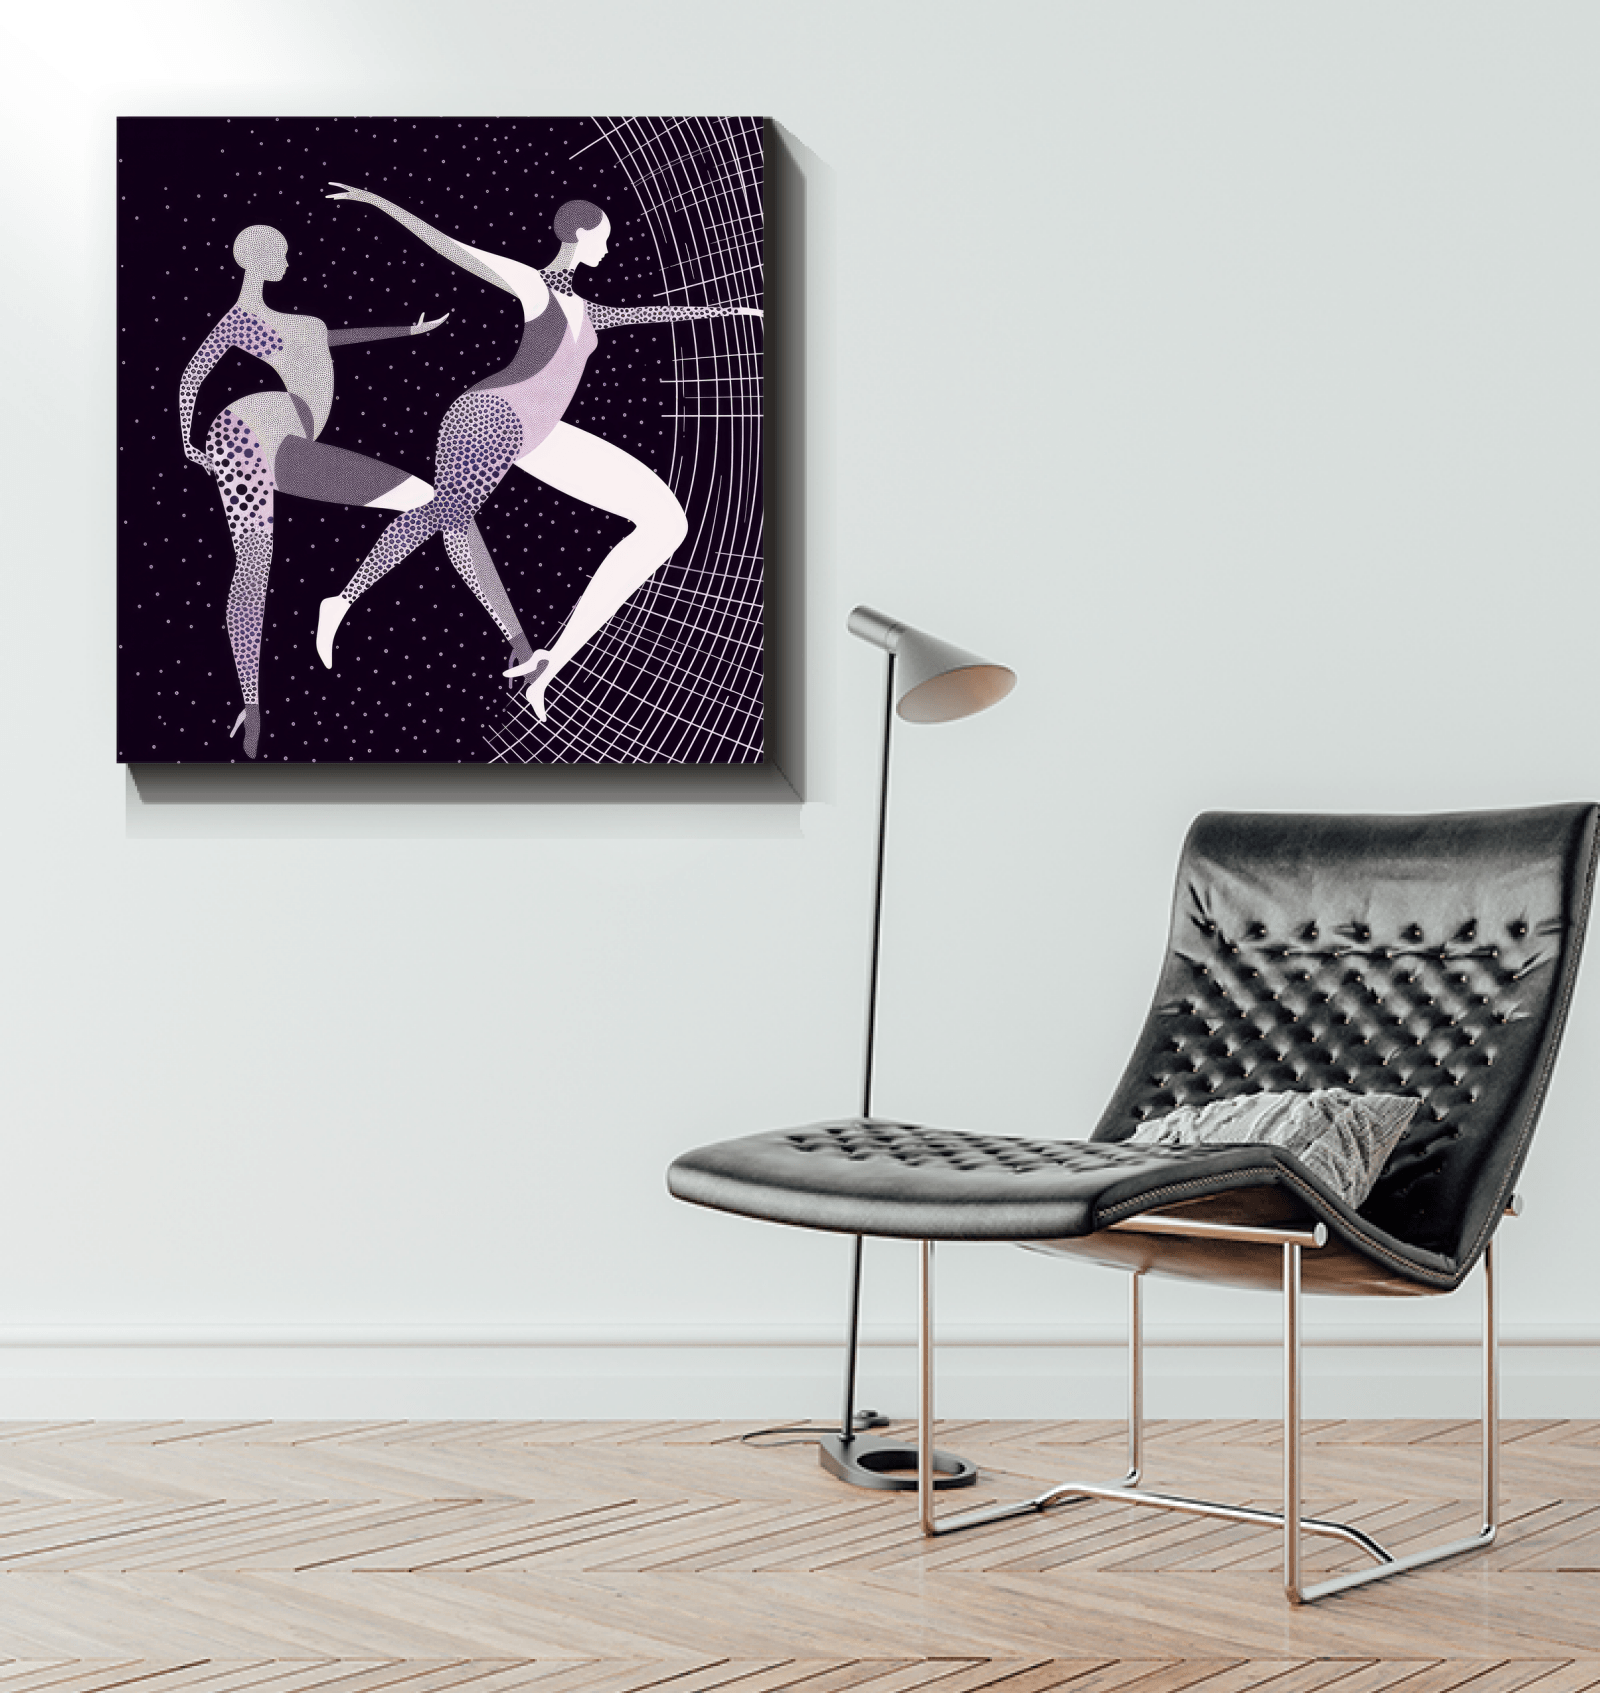 Fierce Feminine Dance Moves Wrapped Canvas - Beyond T-shirts